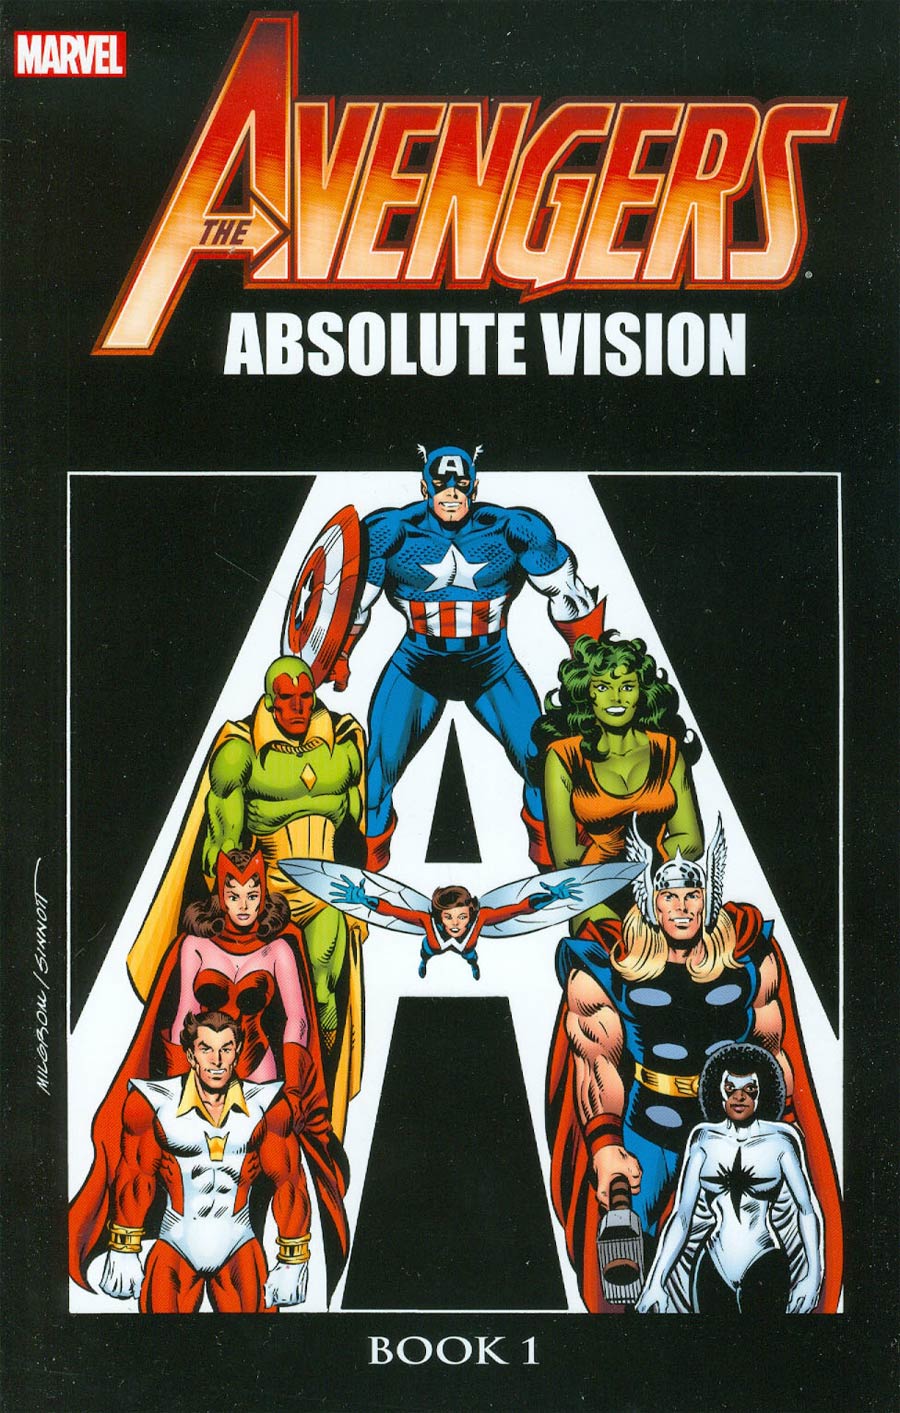 Avengers Absolute Vision Book 1 TP